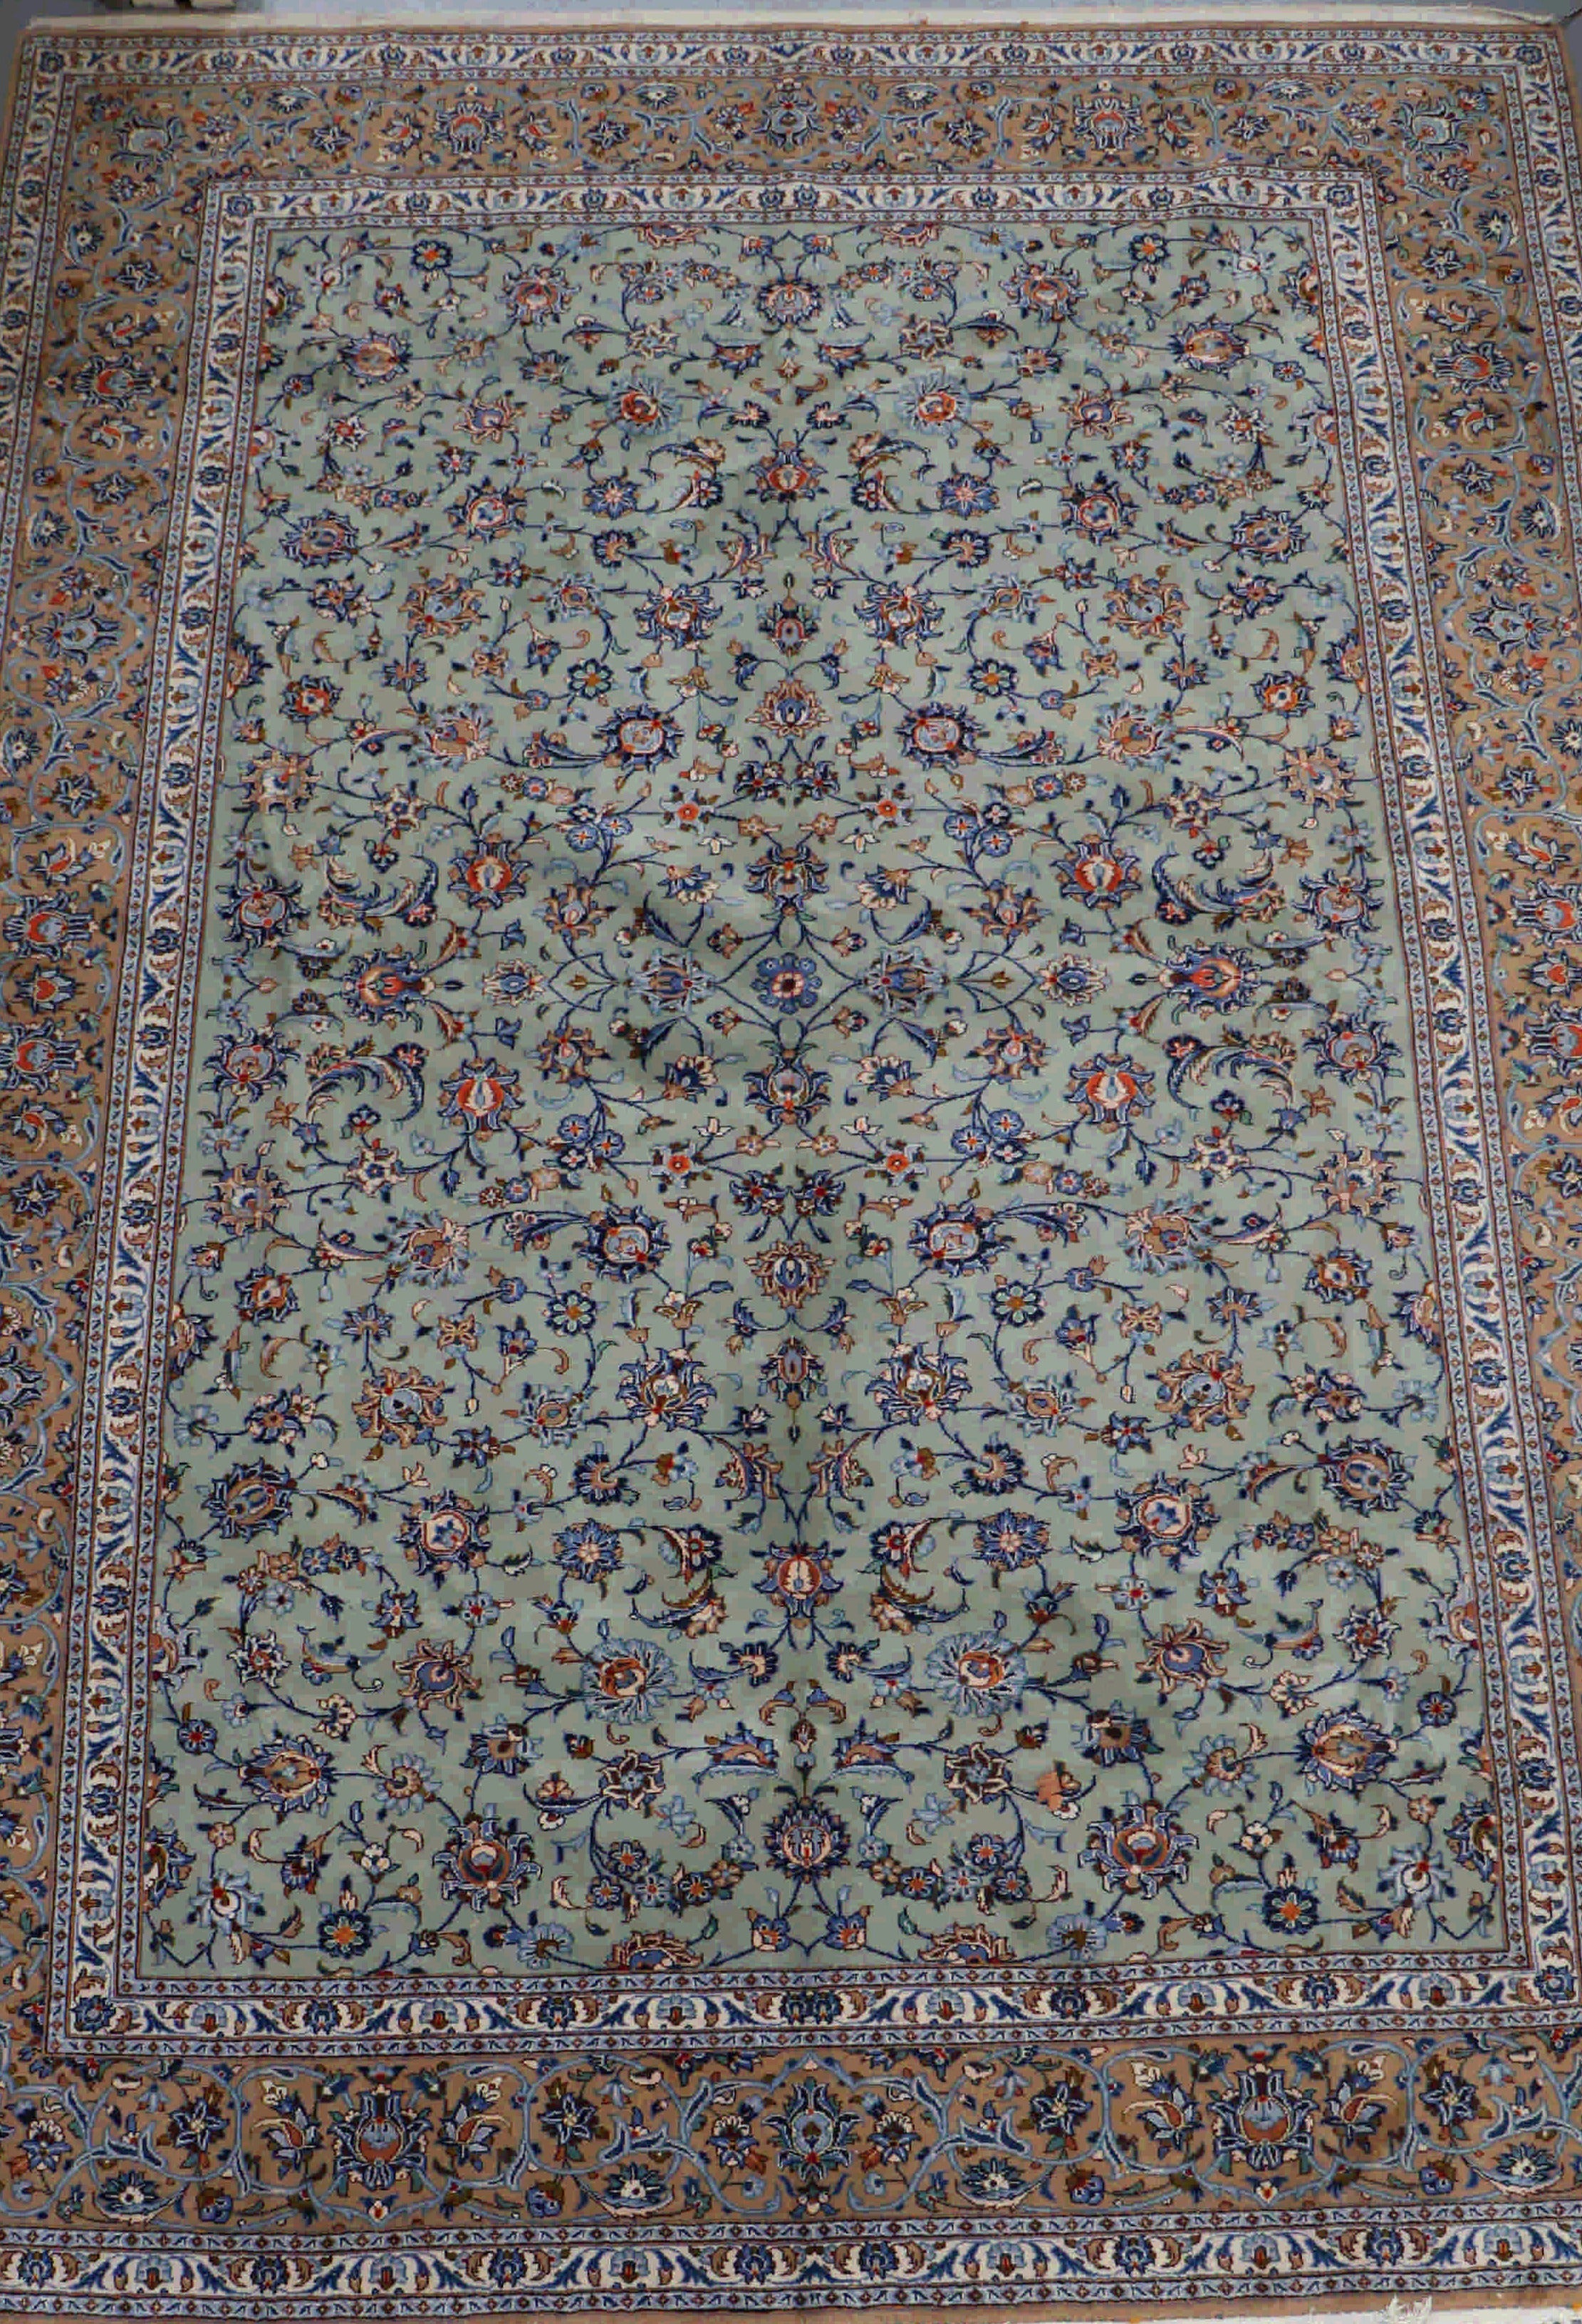 Blue, grey and turquoise kashan rug